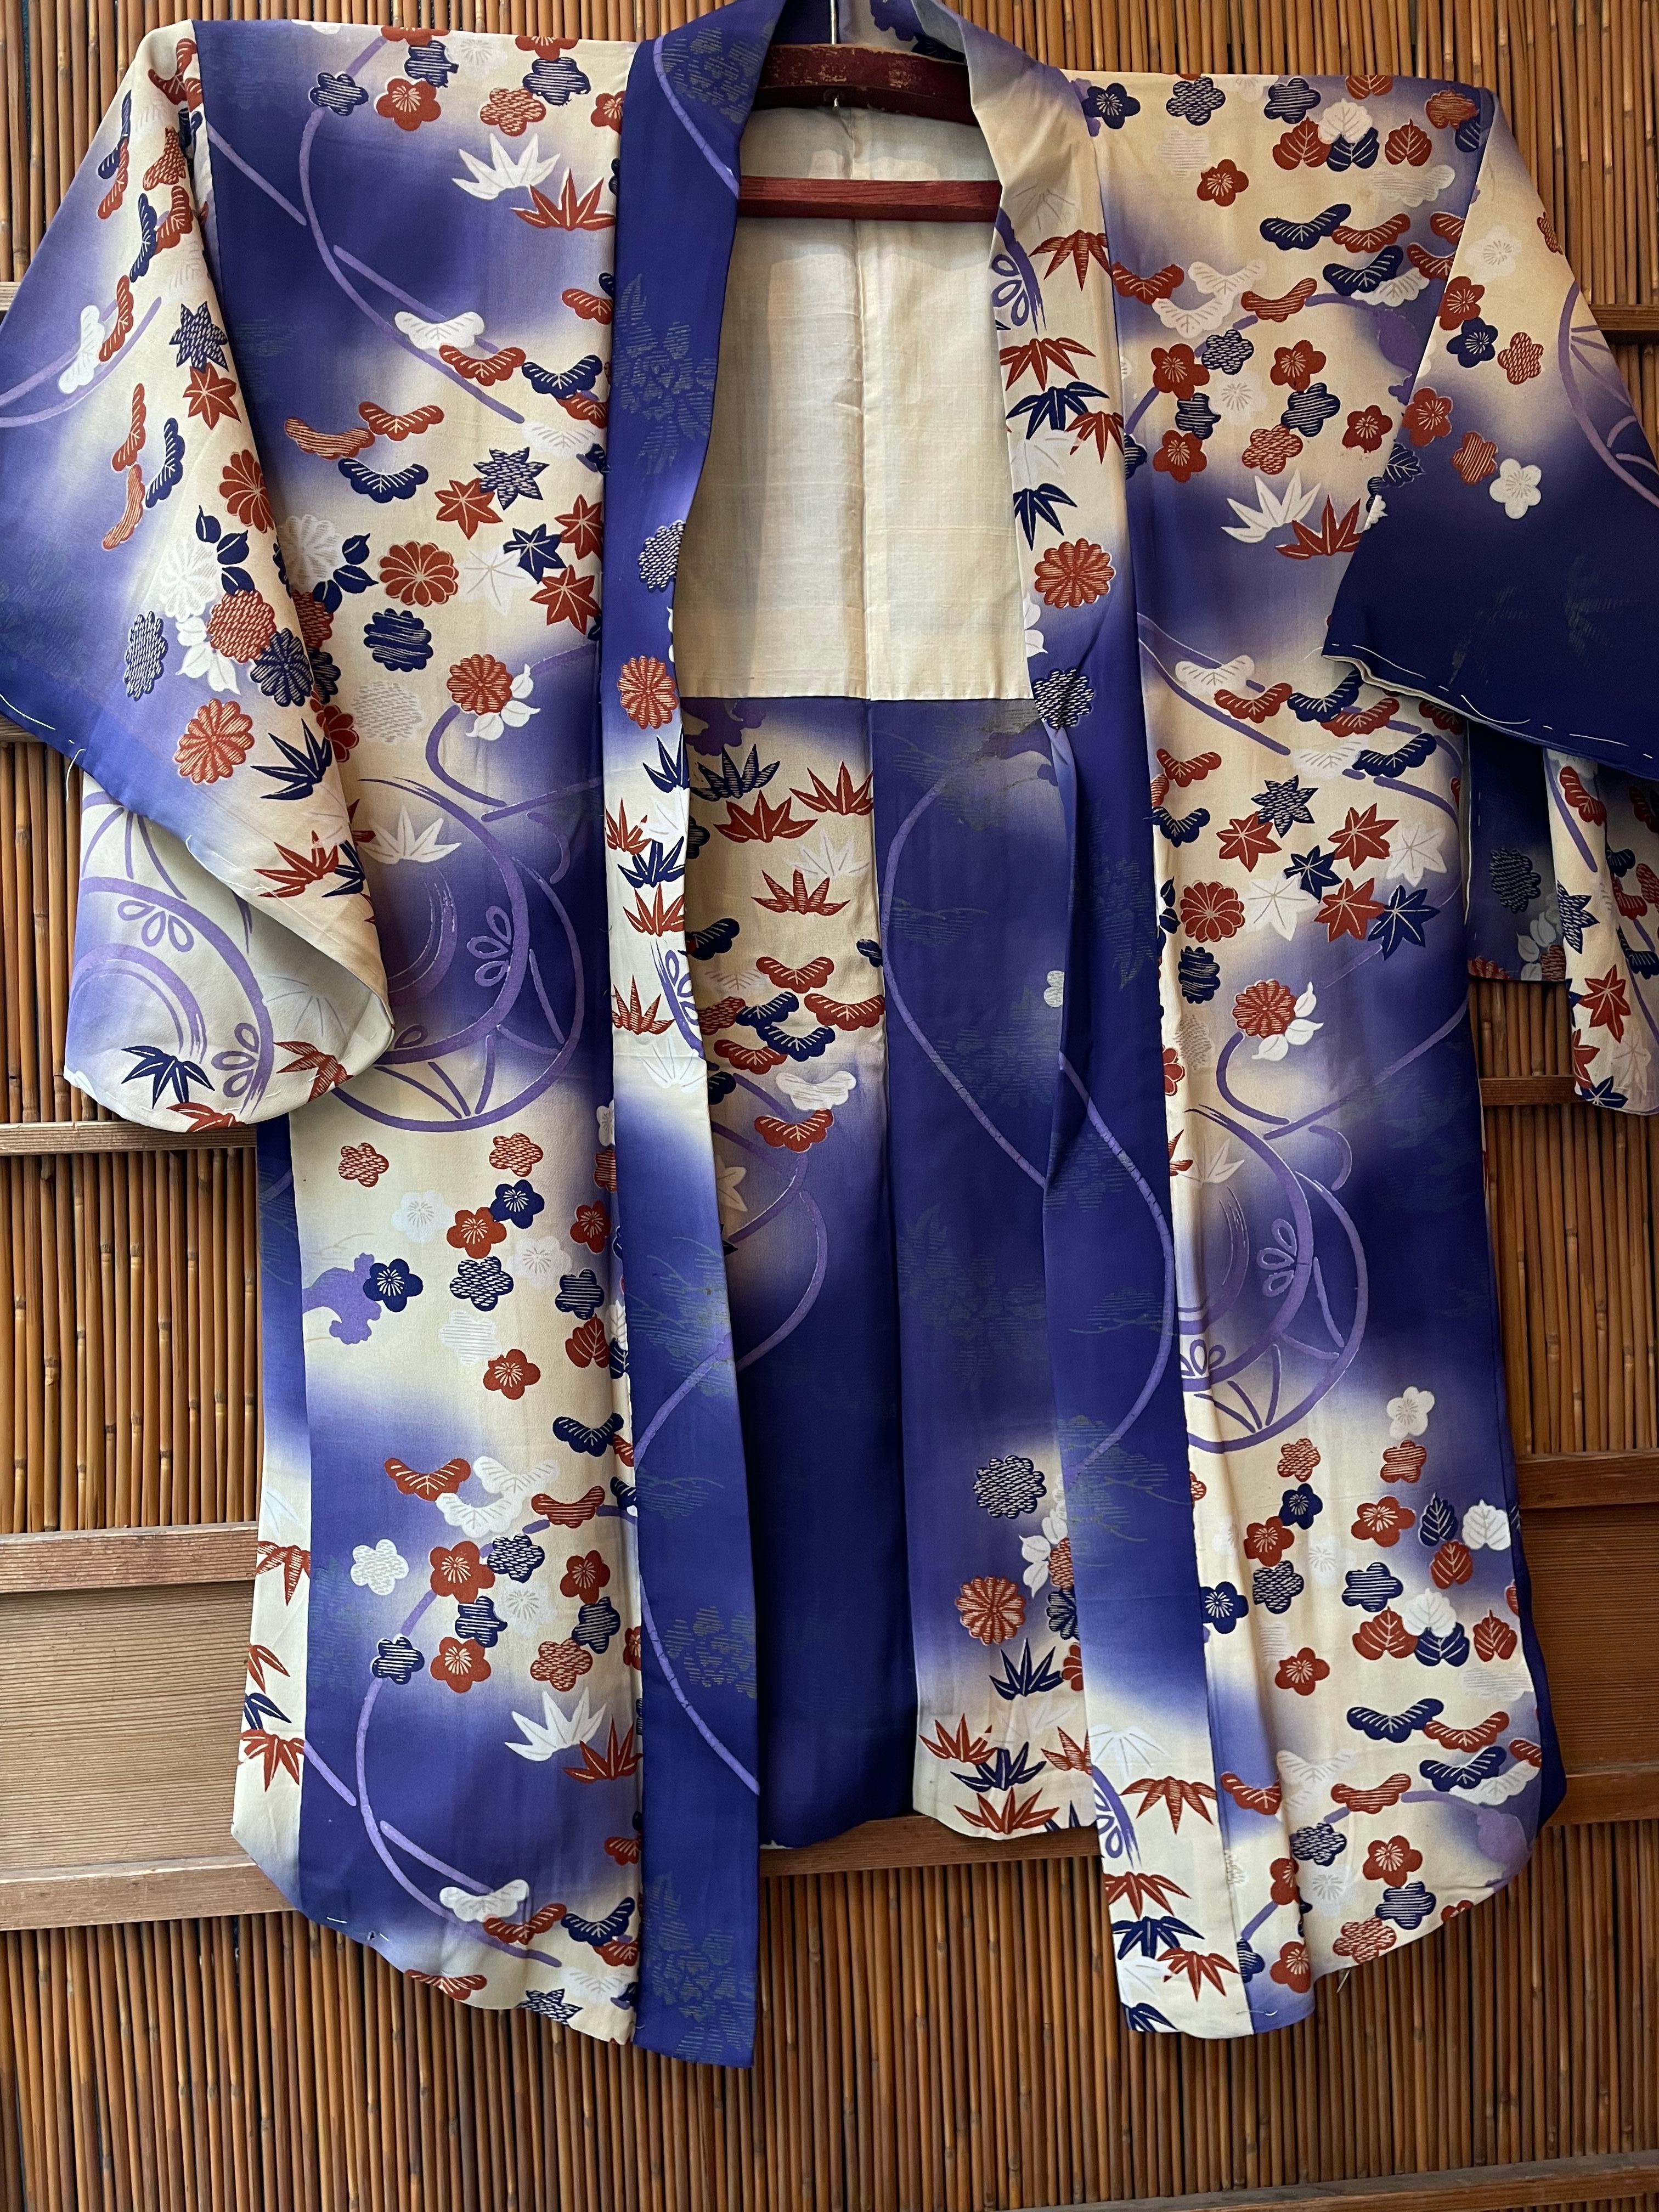 This is a silk jacket which was made in Japan.
It was made in Showa era around 1950s.

The haori is a traditional Japanese jacket worn over a kimono. Resembling a shortened kimono with no overlapping front panels, the haori typically features a